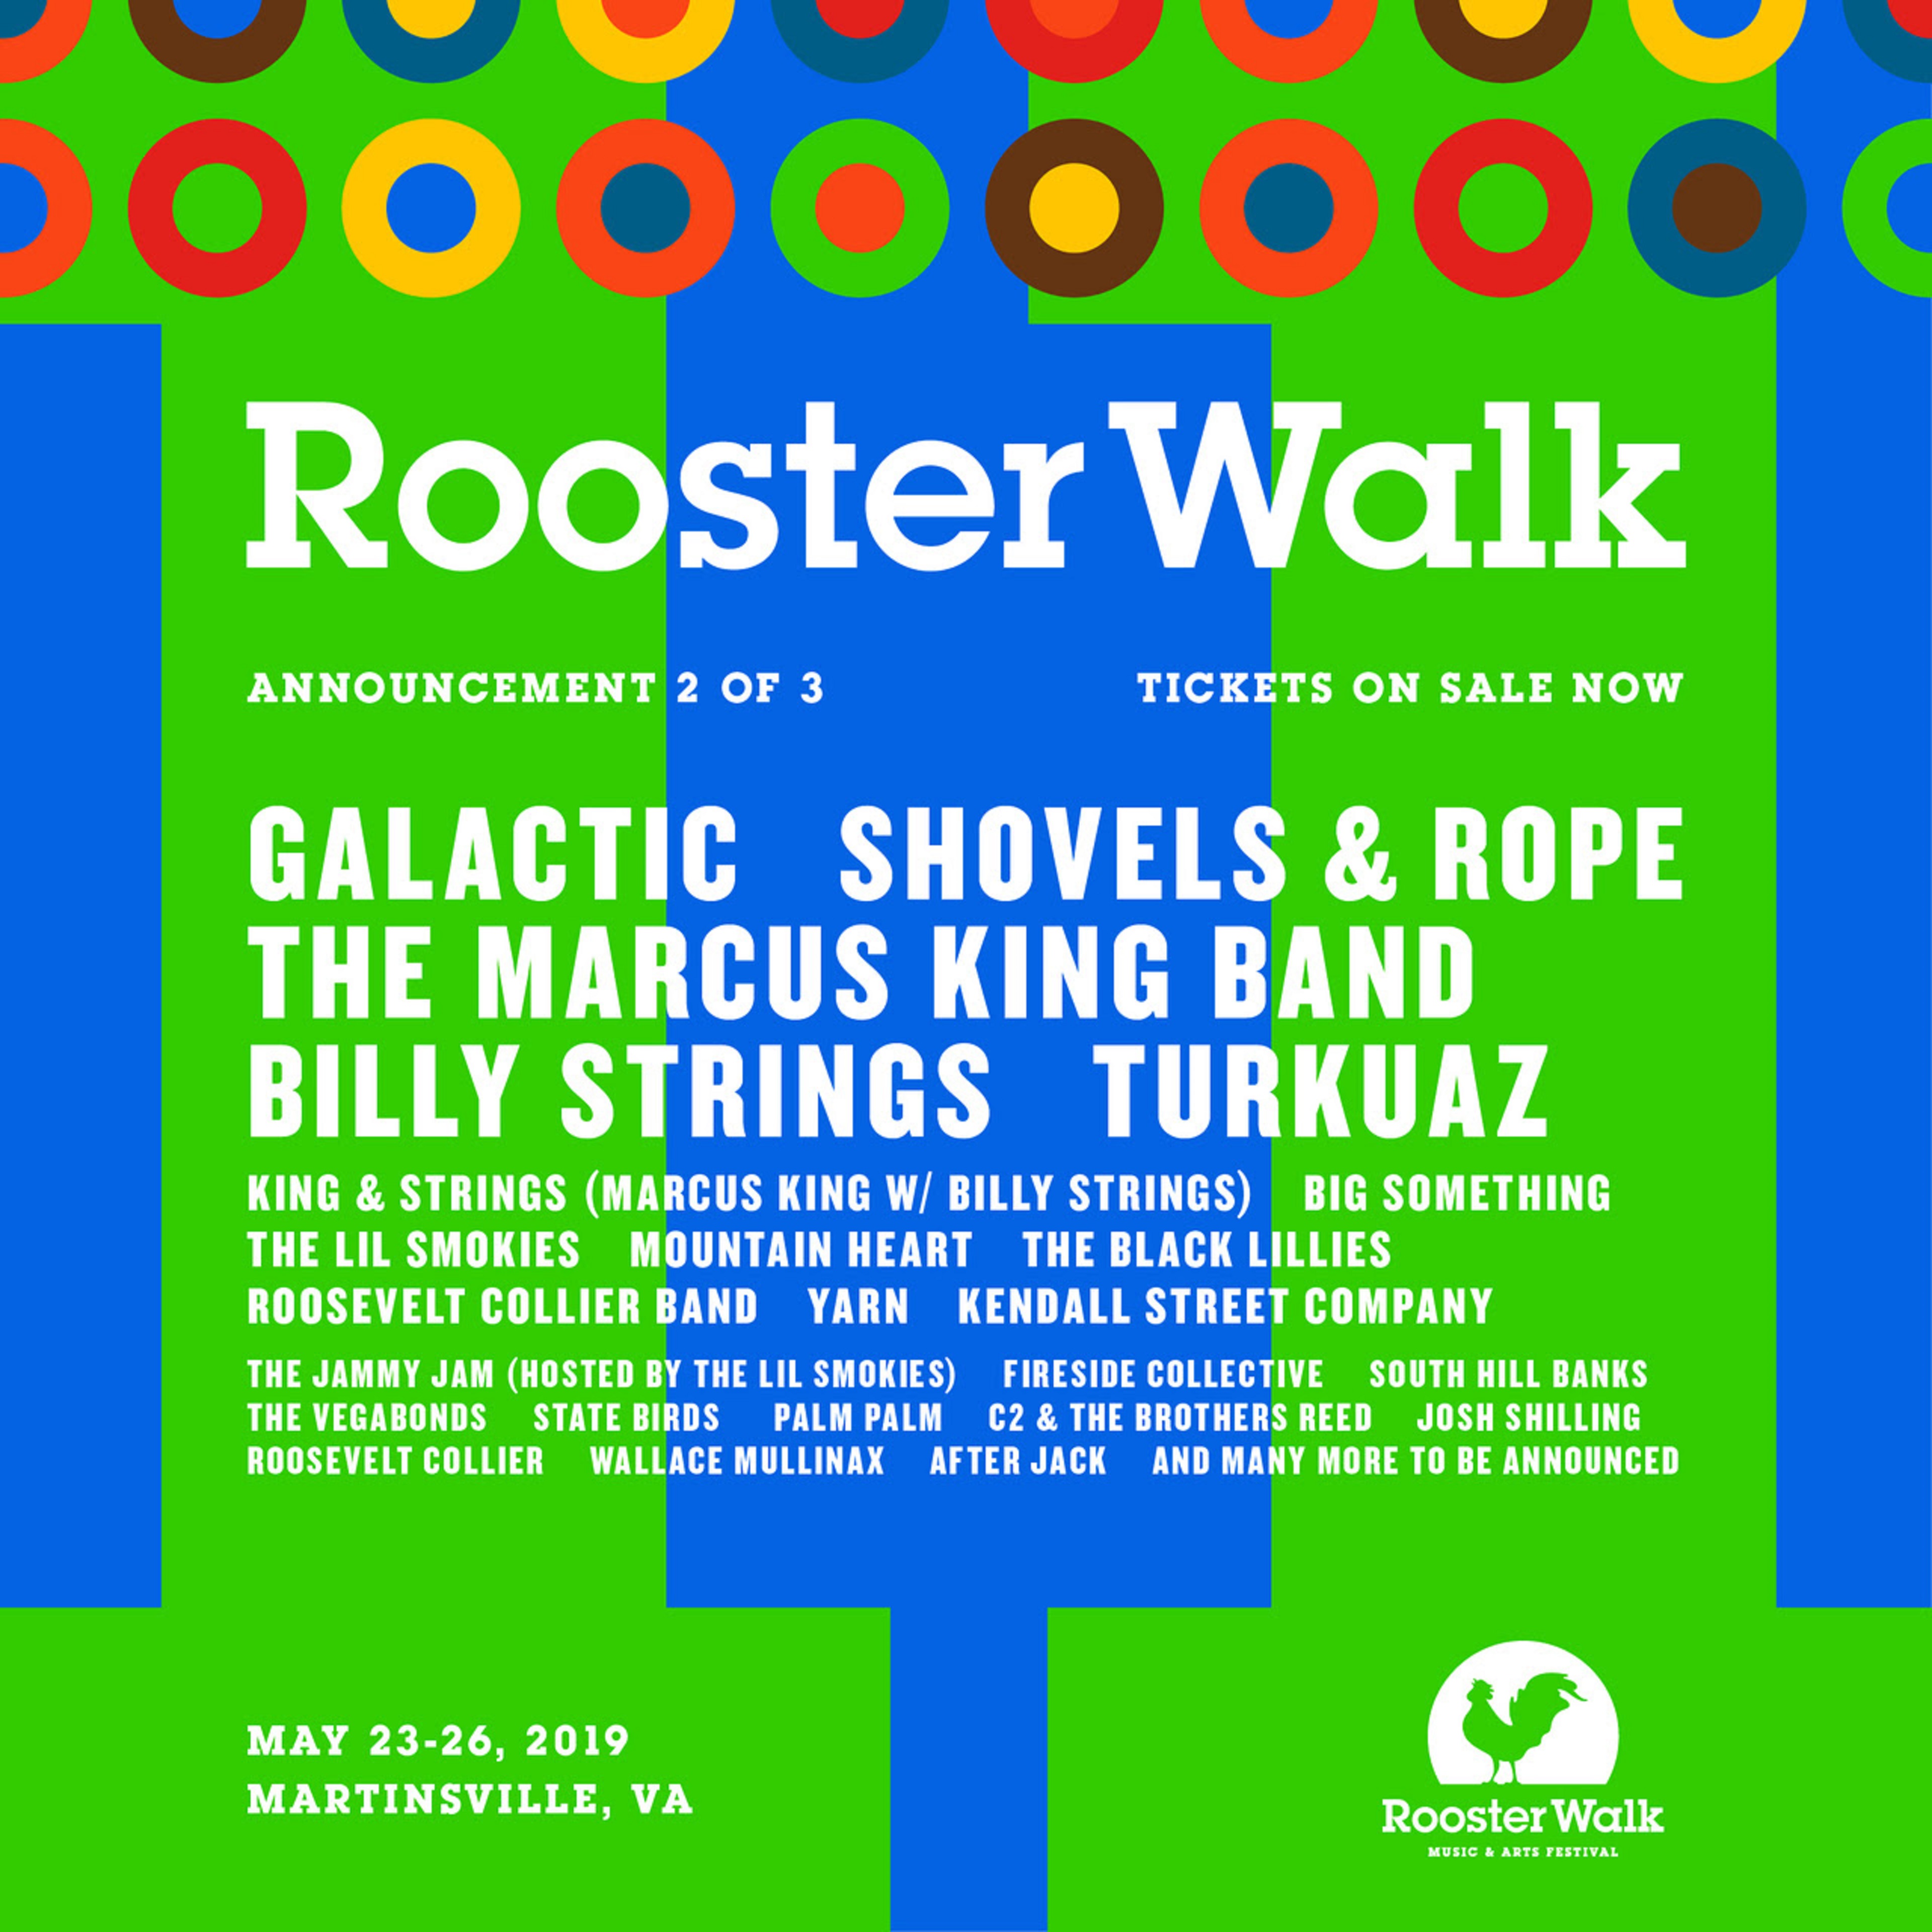 Rooster Walk Reveals 11th Annual Lineup